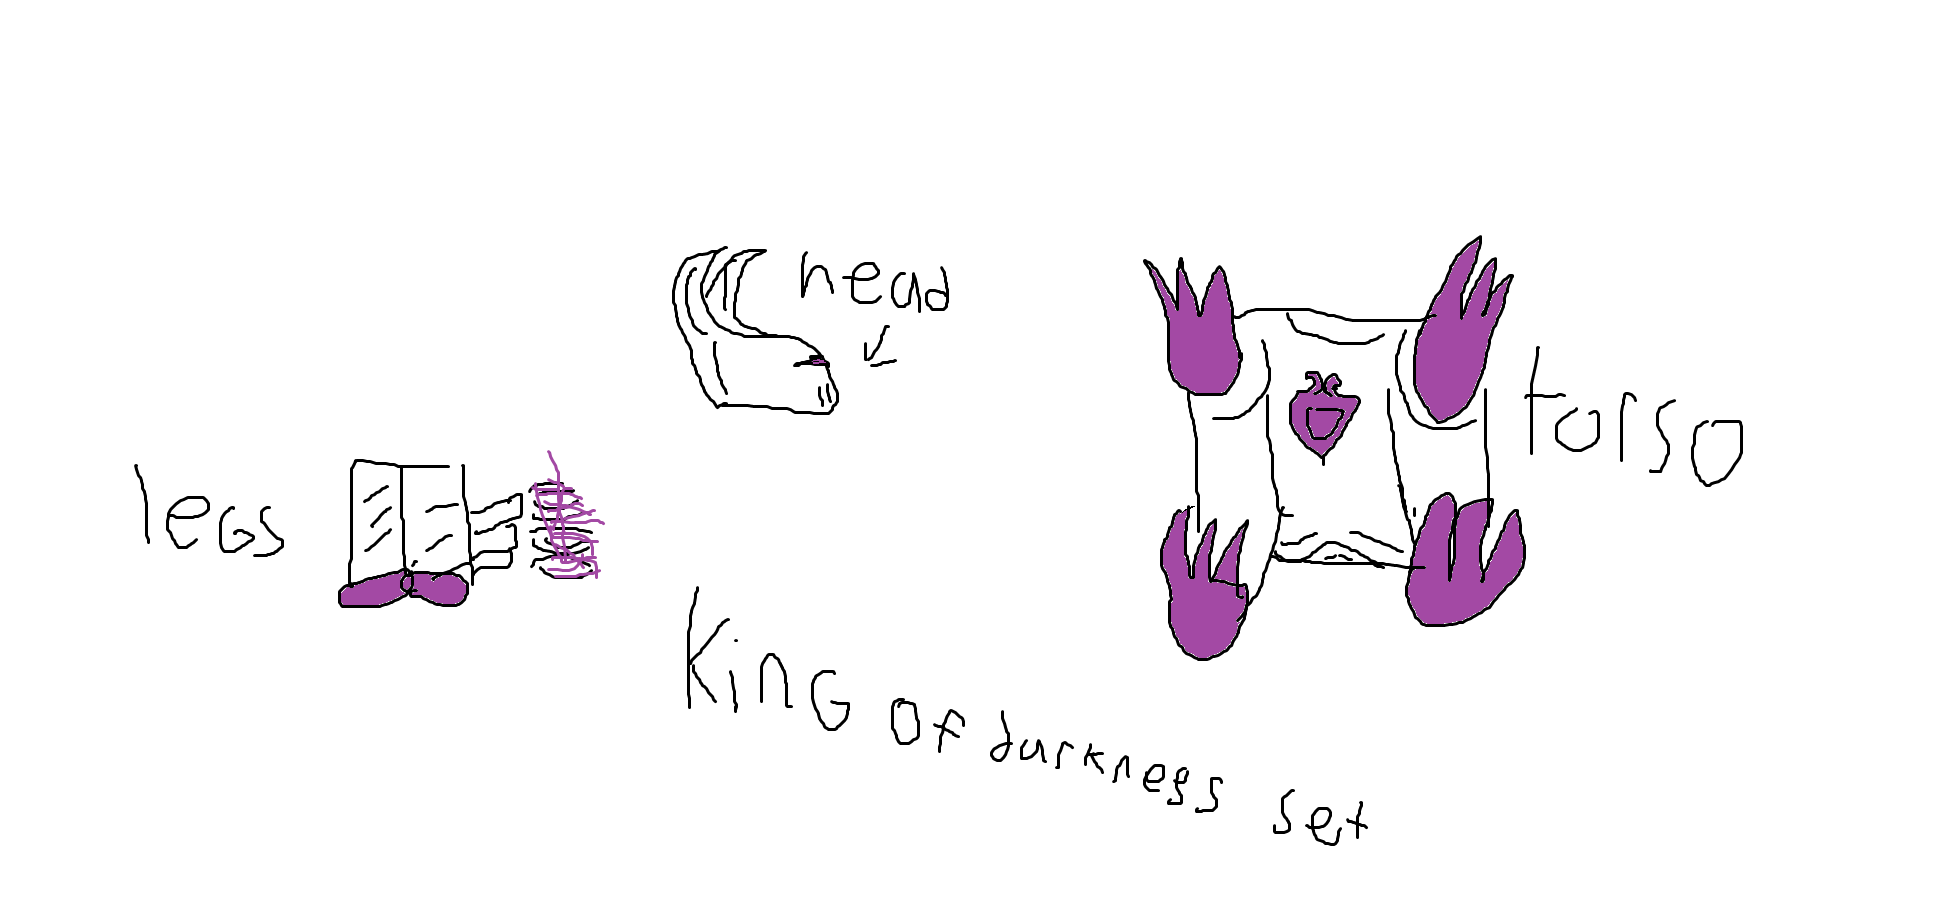 king of darkness set.png